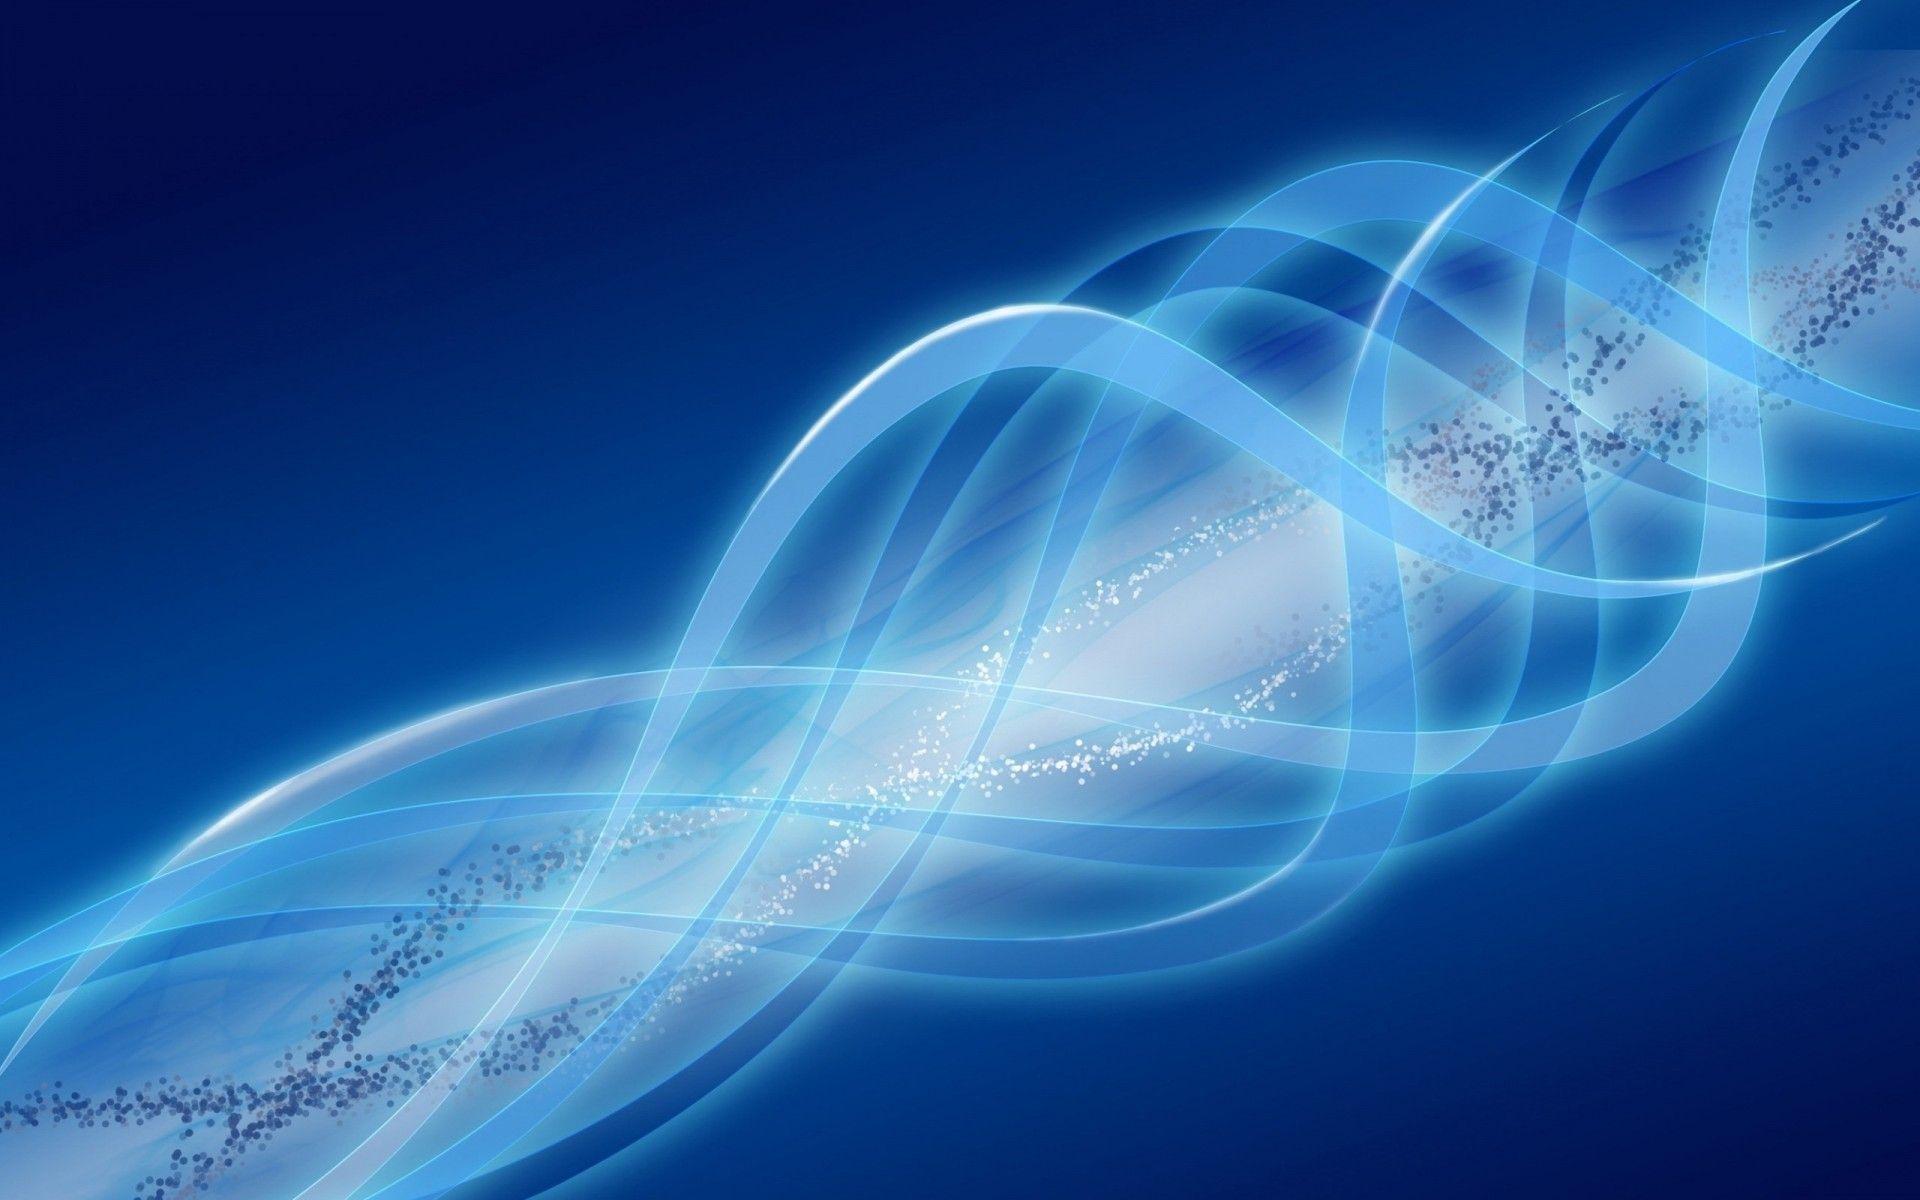 Blue Abstract Curves. Android wallpaper for free